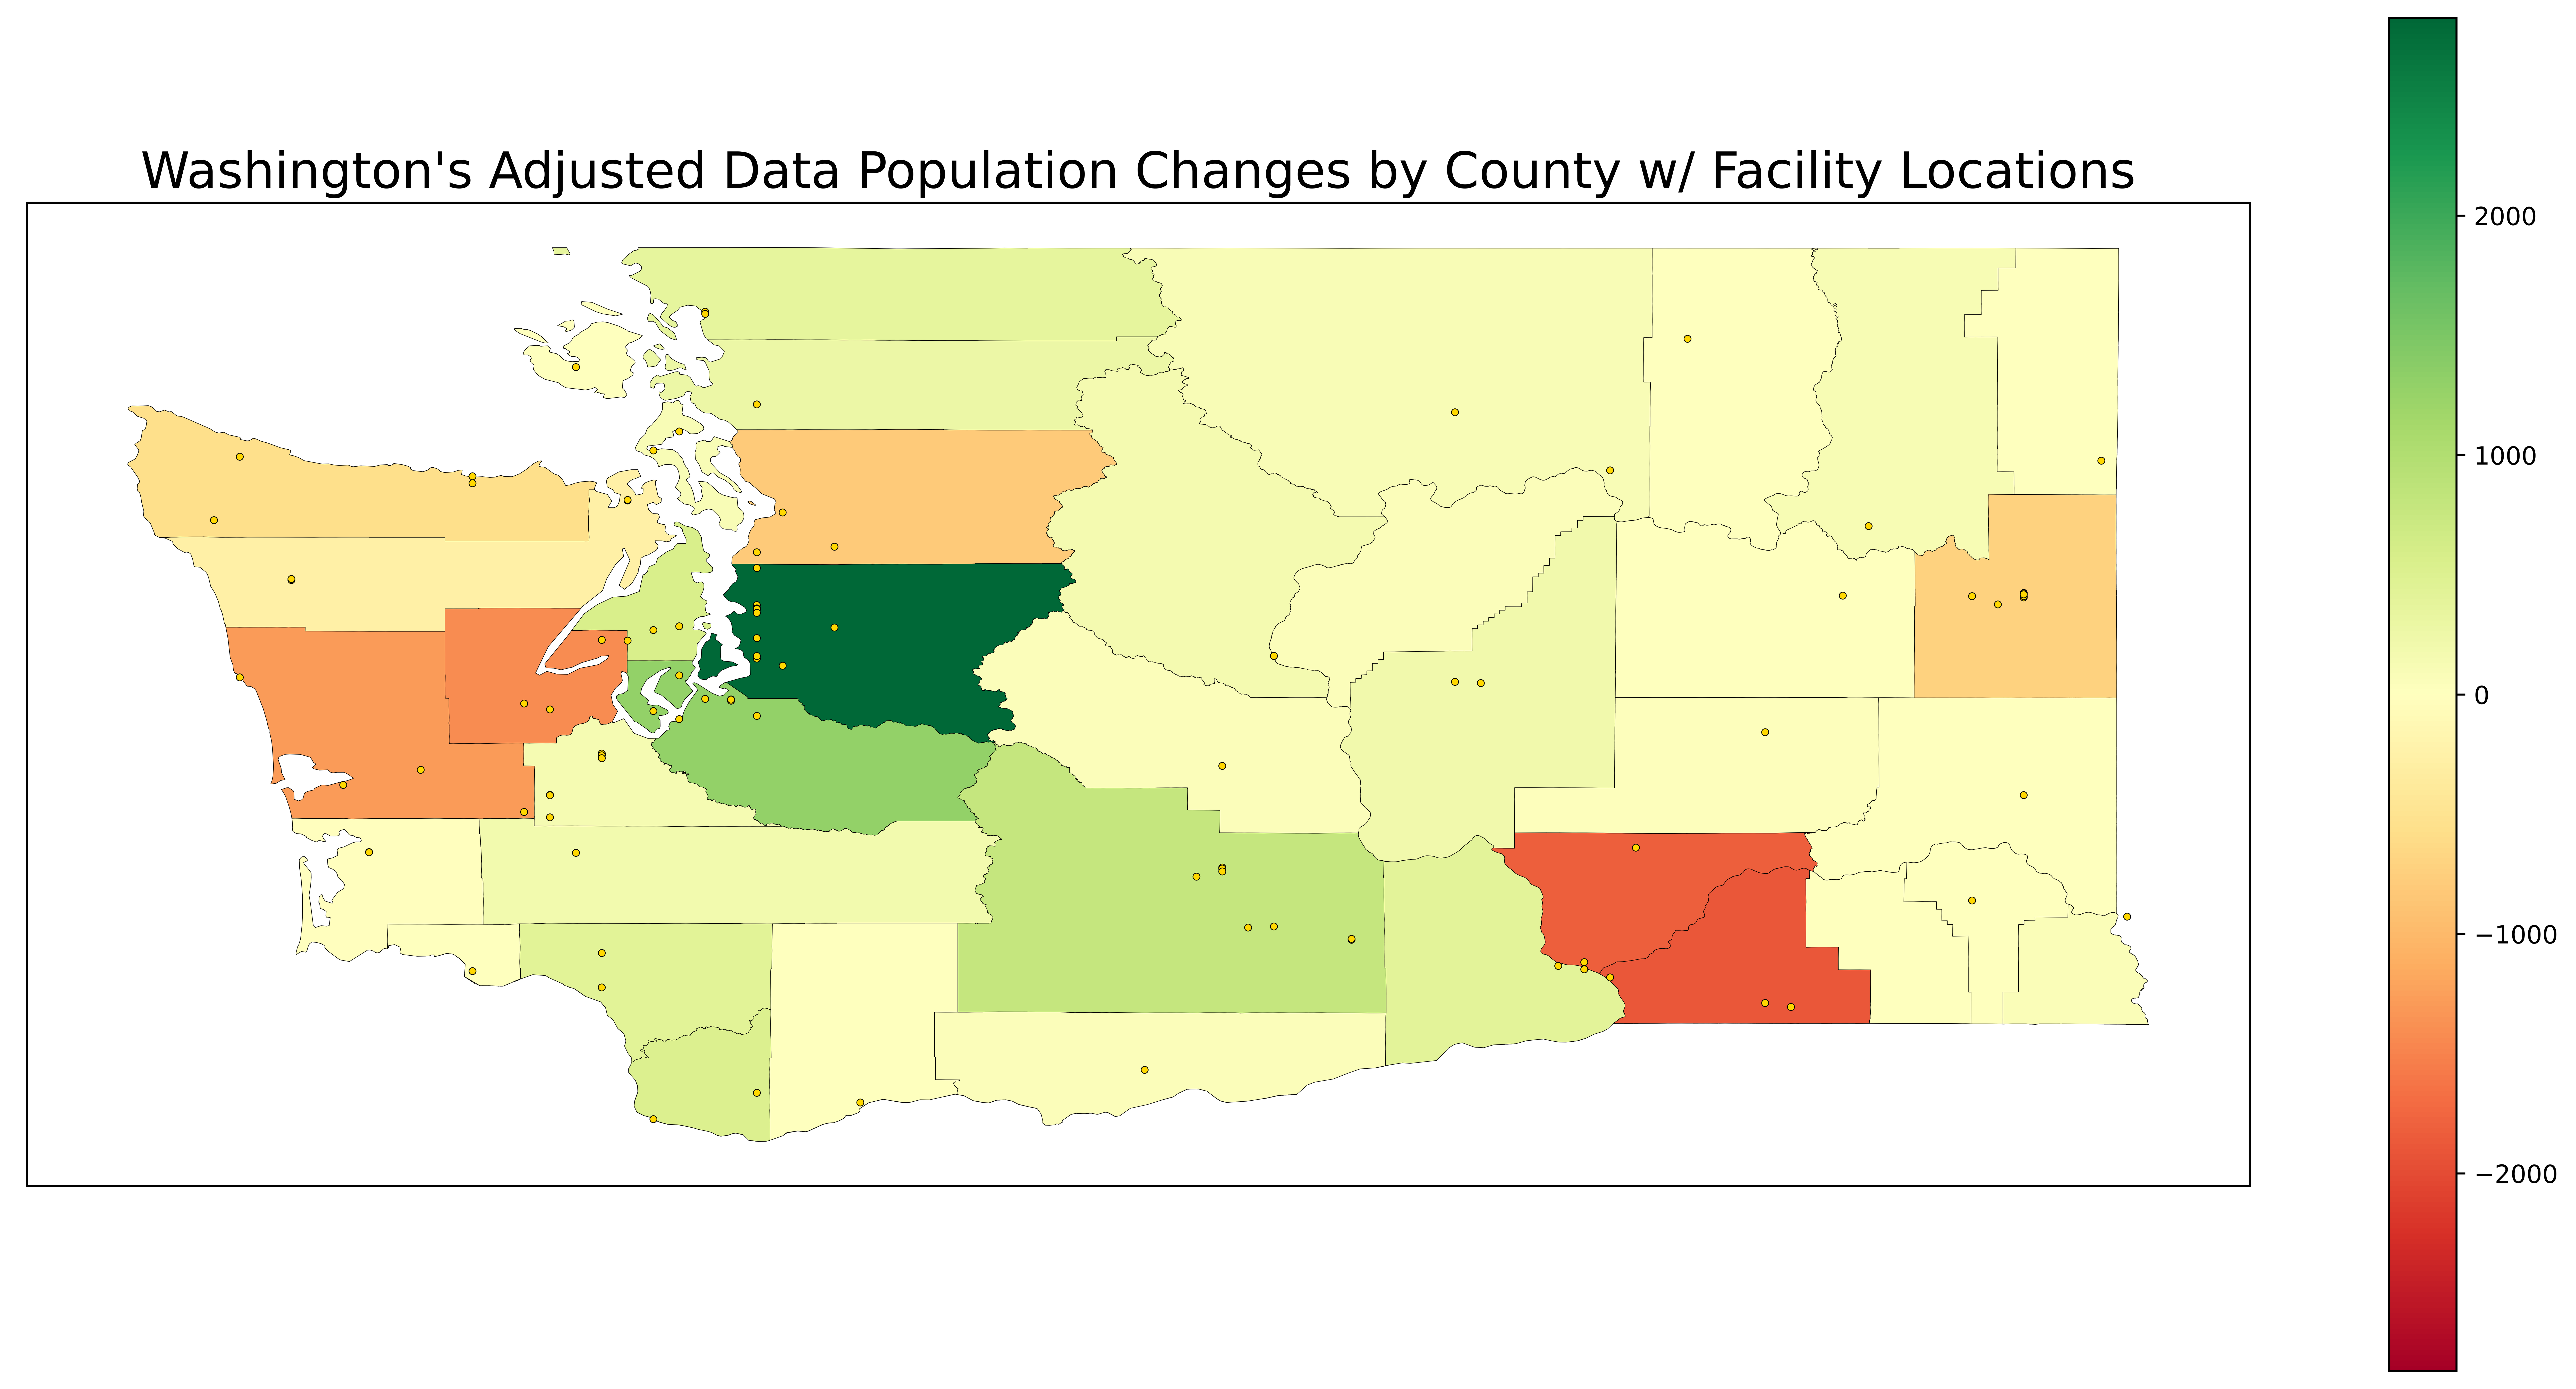 Washington's Adjusted Data Population Changes by County with Facility Locations